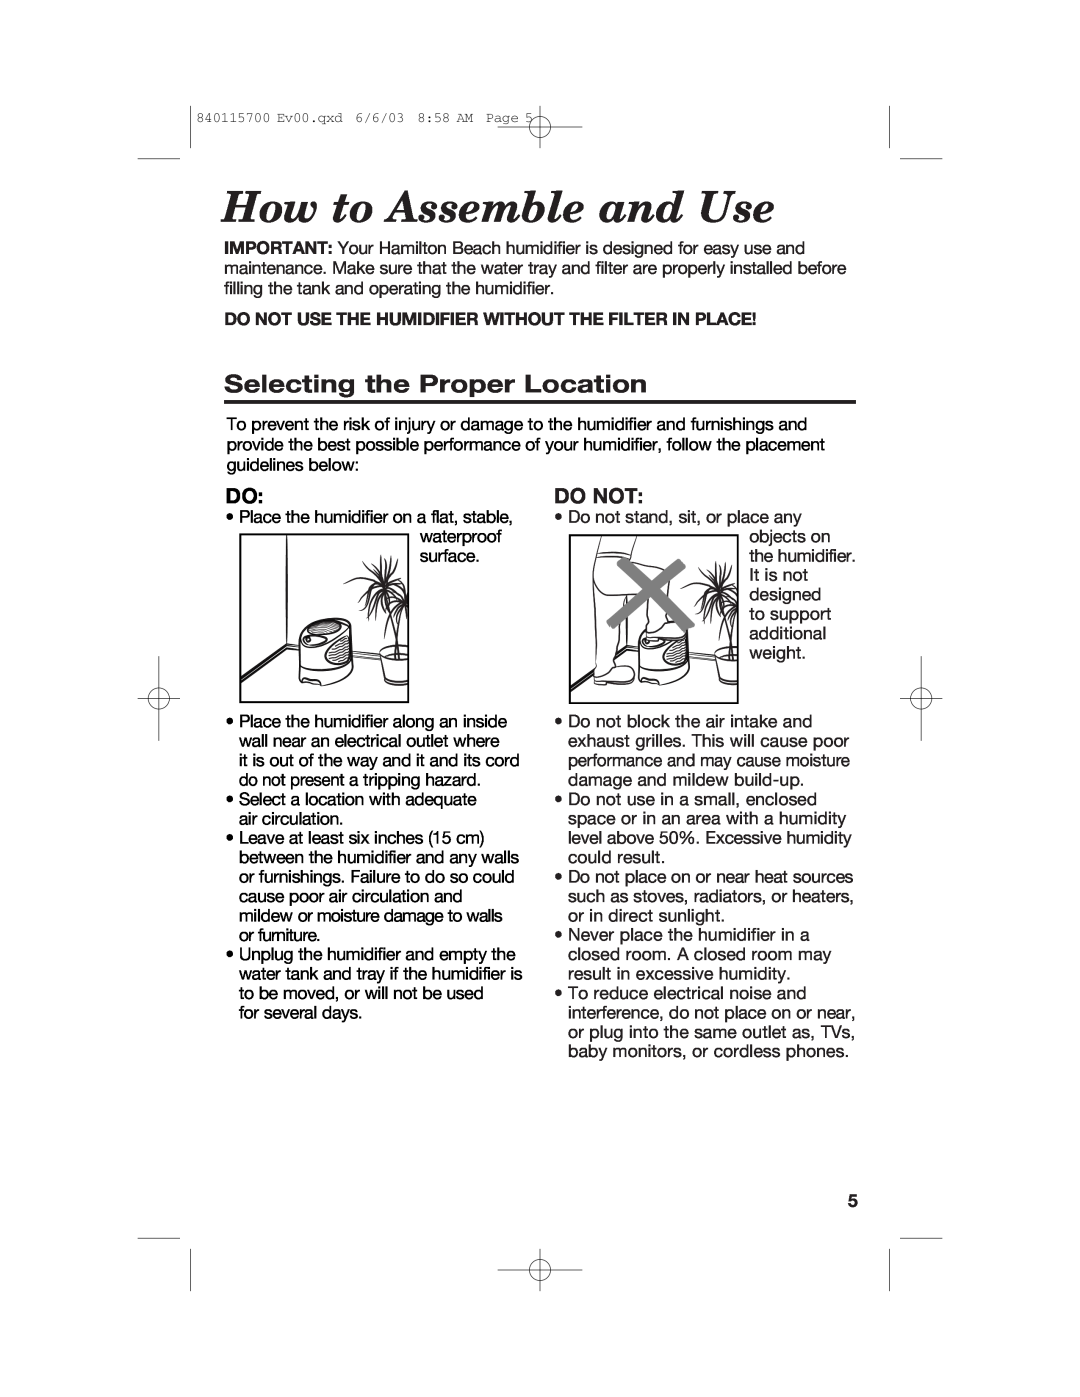 Hamilton Beach 05520C, 05518C, 05910, 05519C, 05521C, 05920 How to Assemble and Use, Selecting the Proper Location, Do Not 